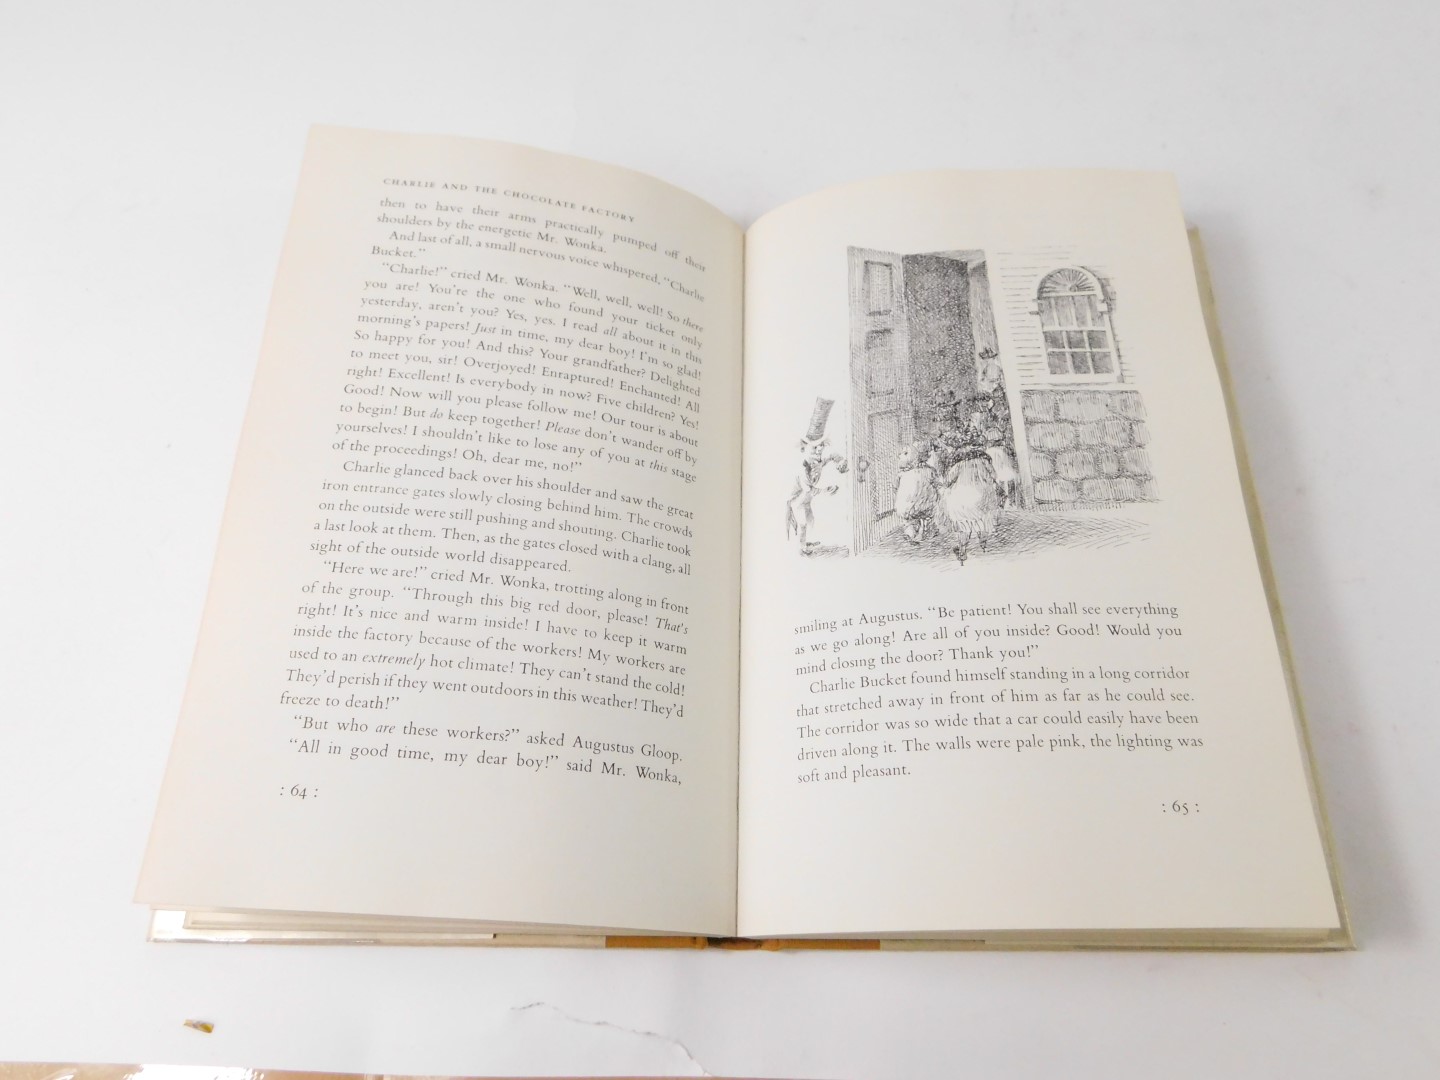 Roald Dahl. Charlie and The Chocolate Factory, first edition with dust wrapper, illustrated by - Image 4 of 6